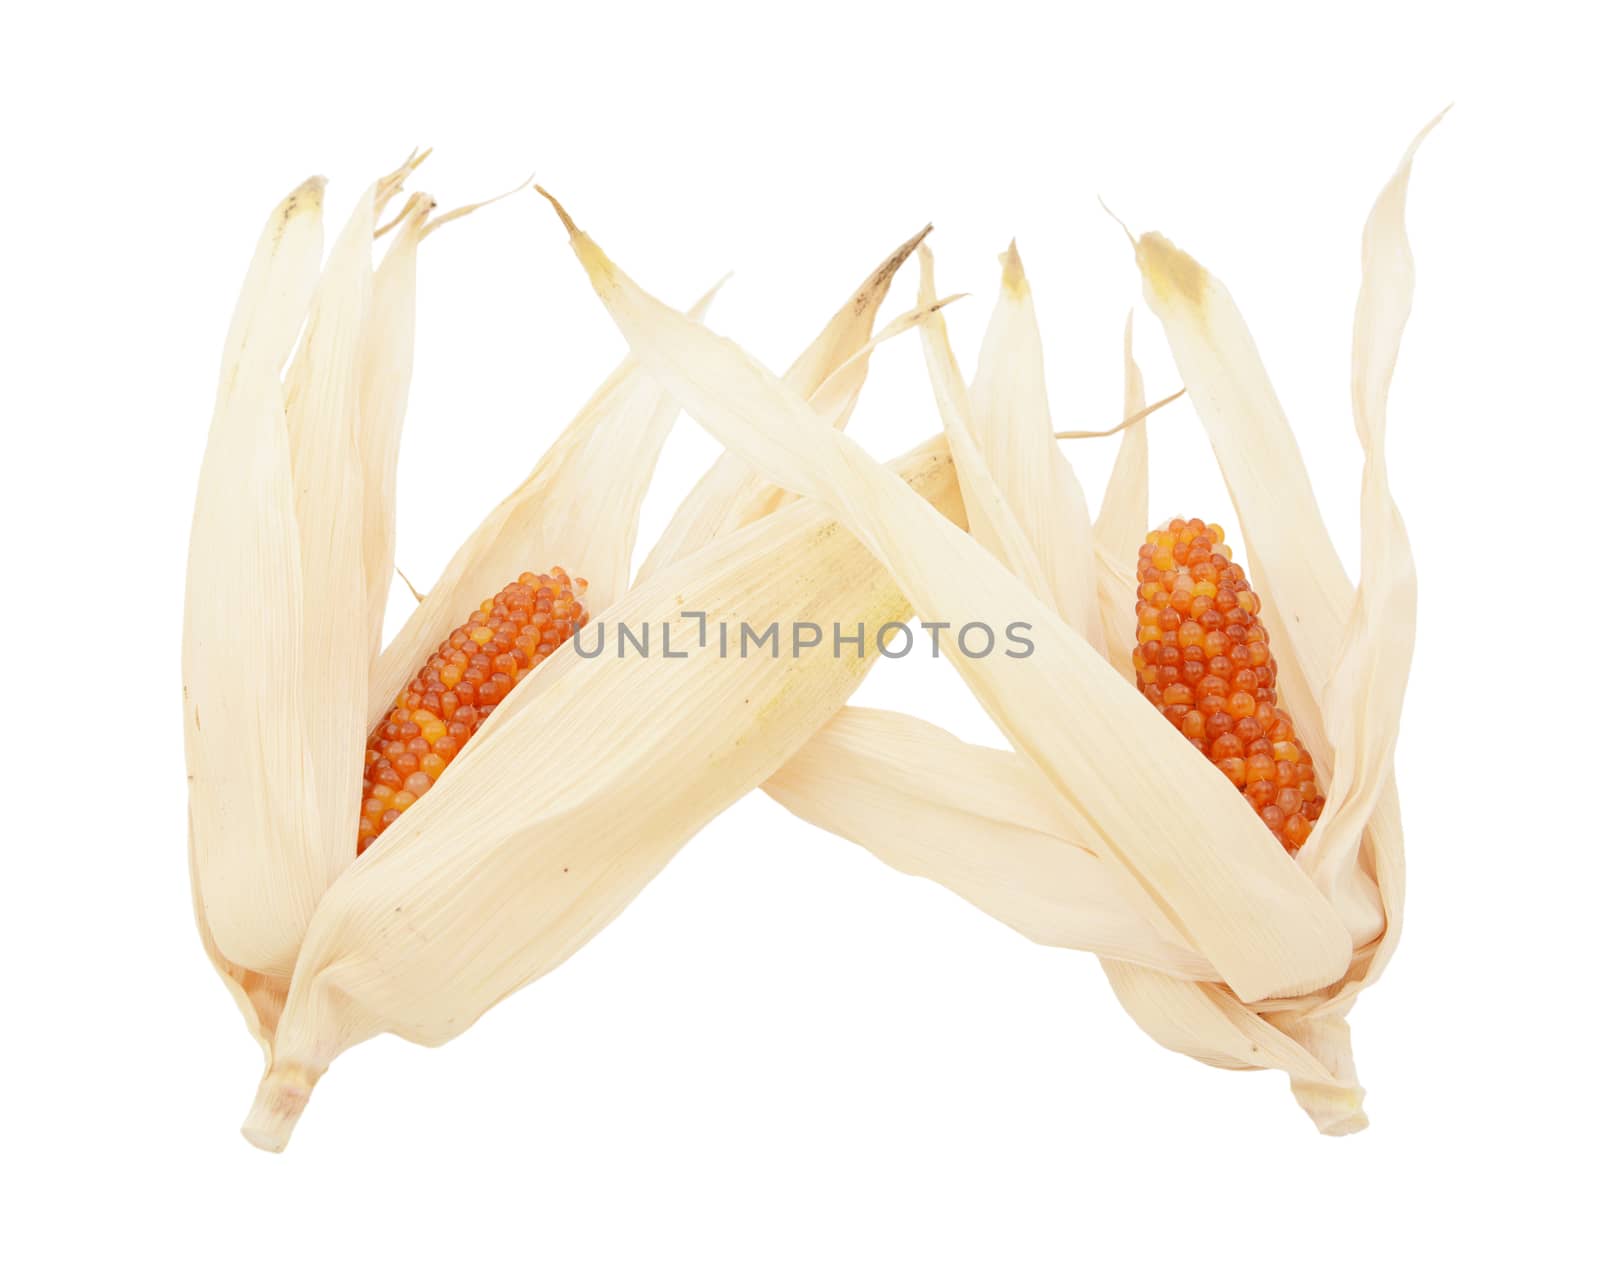 Two cobs of ornamental Indian corn with red niblets and dried husks, on a white background